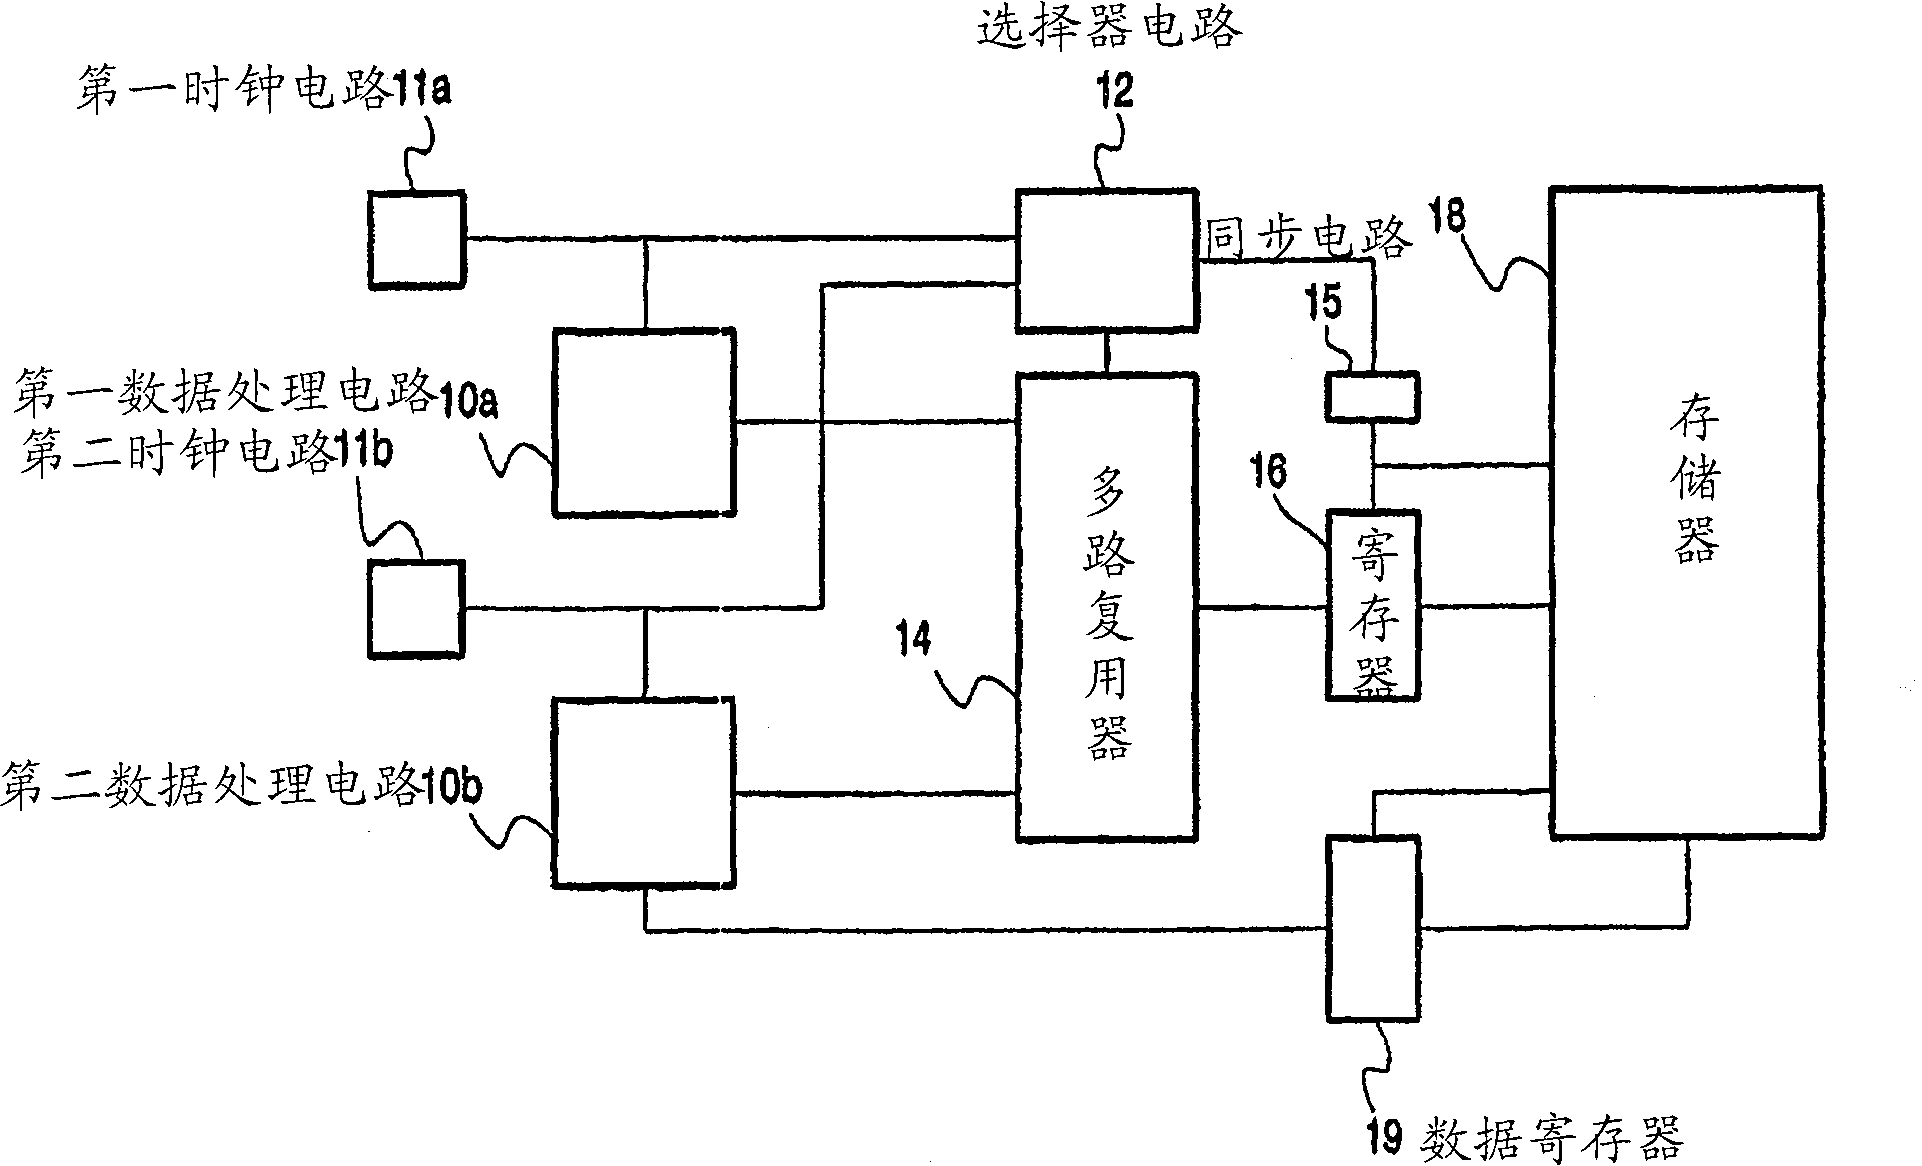 Data processing circuit with multiplexed memory